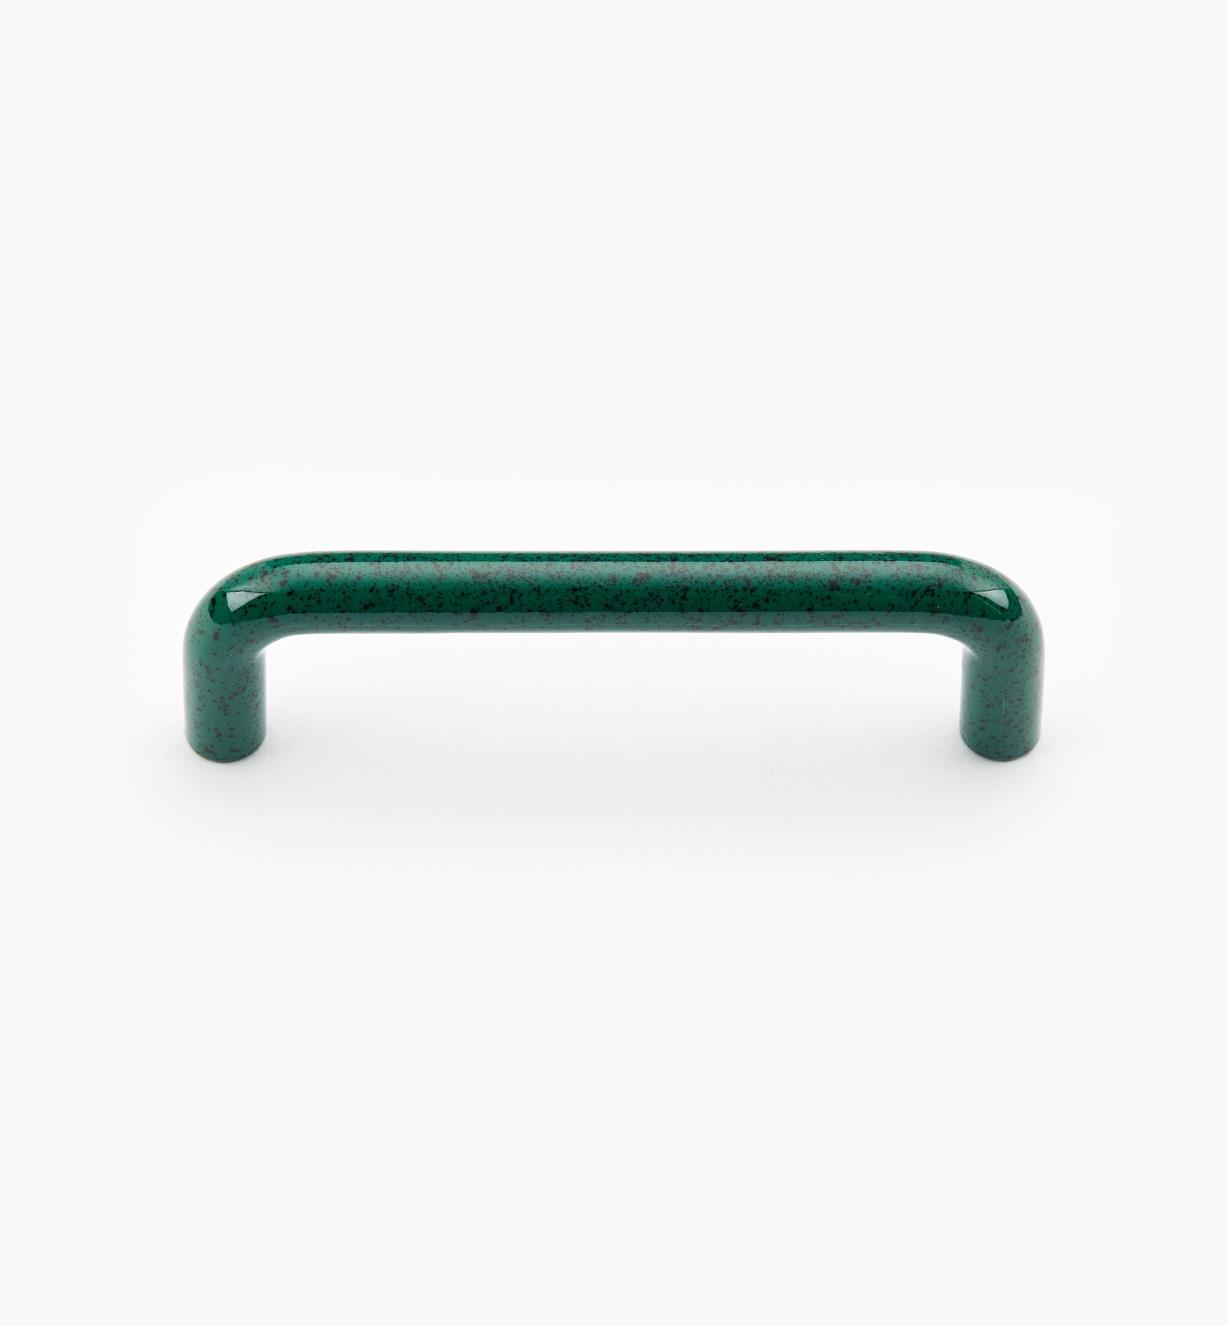 00W3871 - 96mm Marbled Green Handle